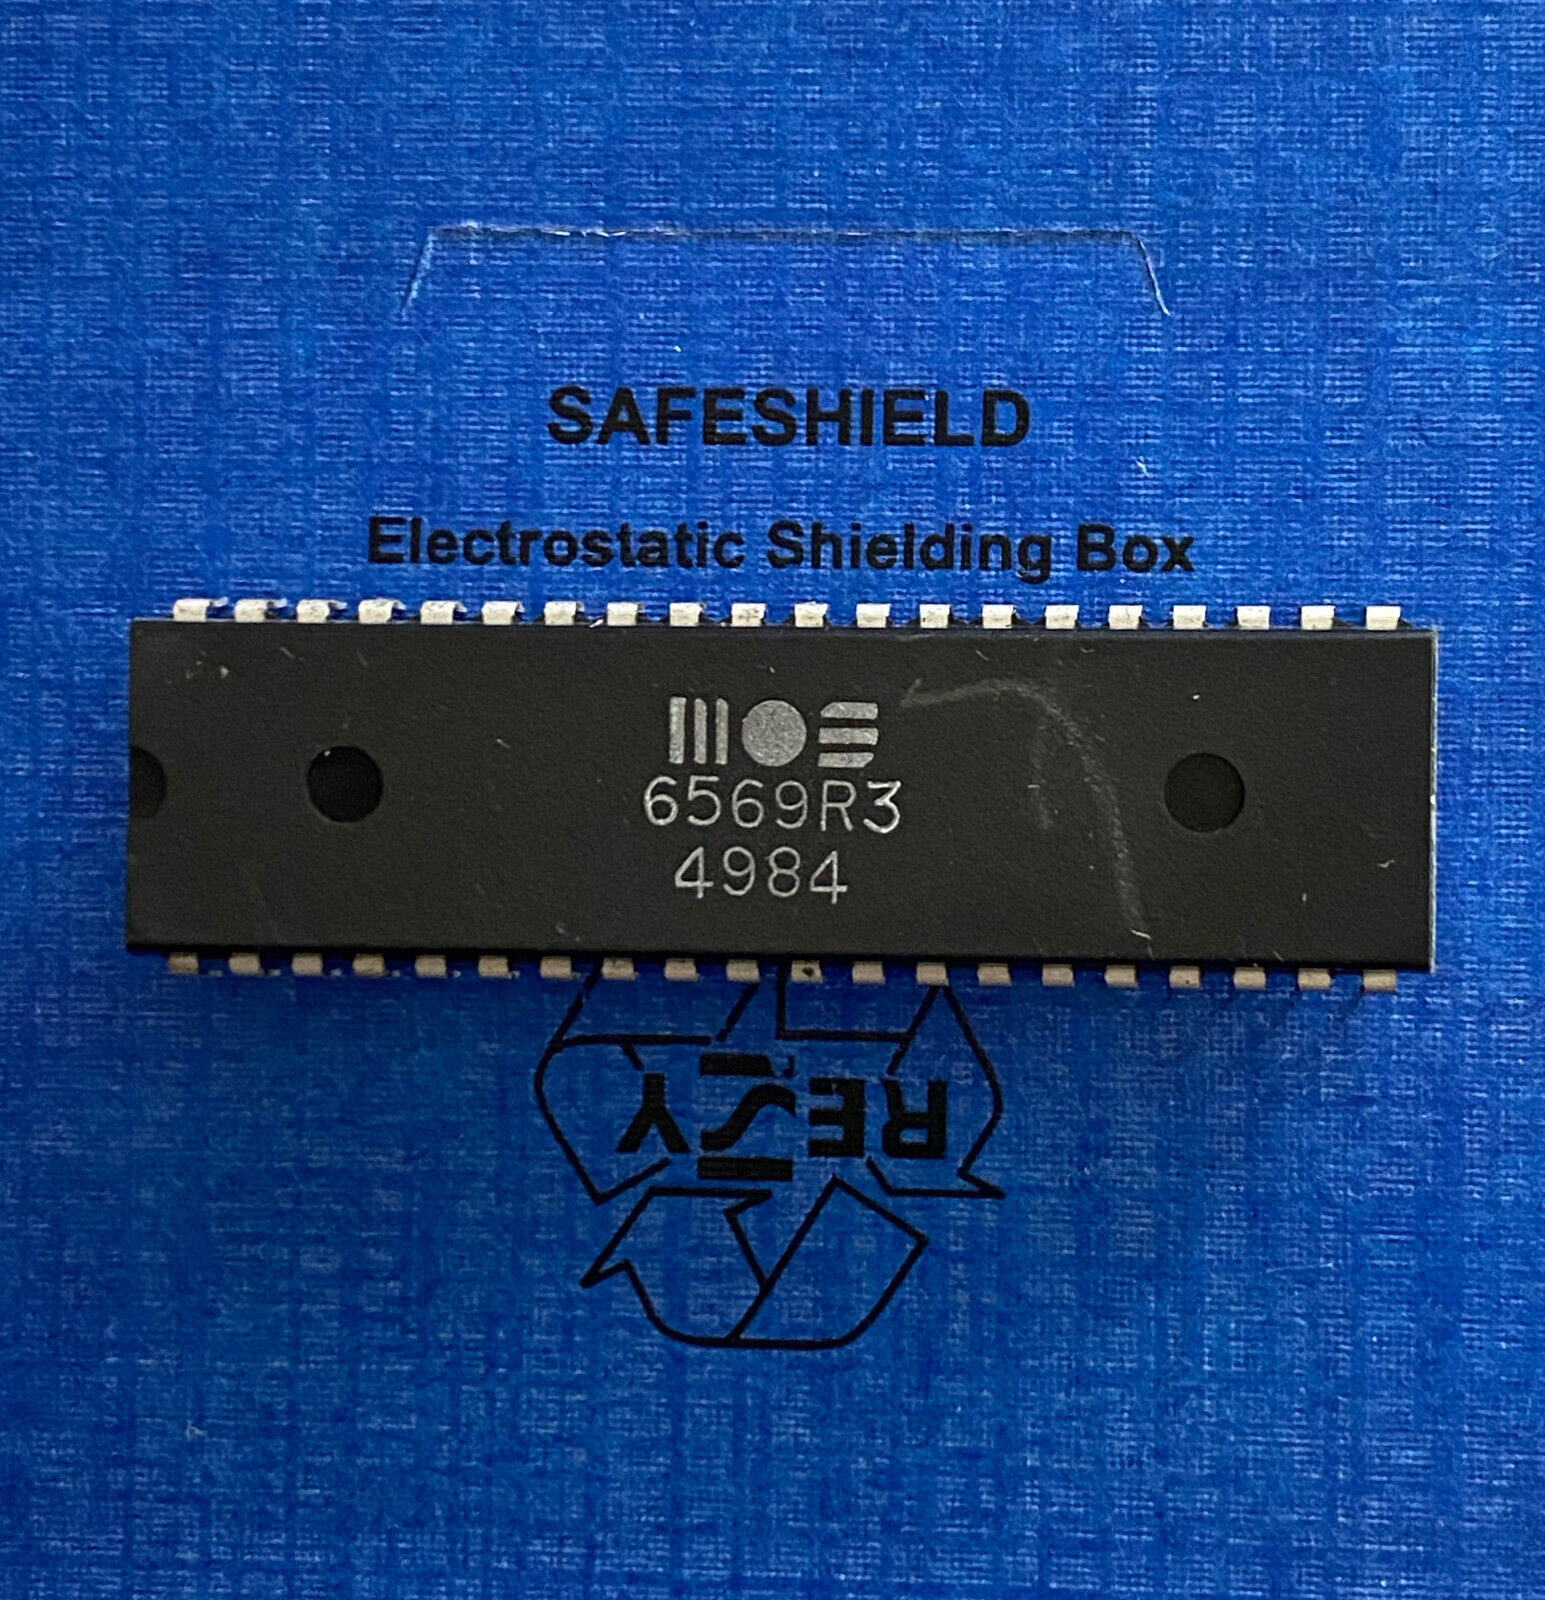 Mos 6569 R3 Vic Video Chip Ic for Commodore C64, SX64 / 6569R3 P. Week: 49 84